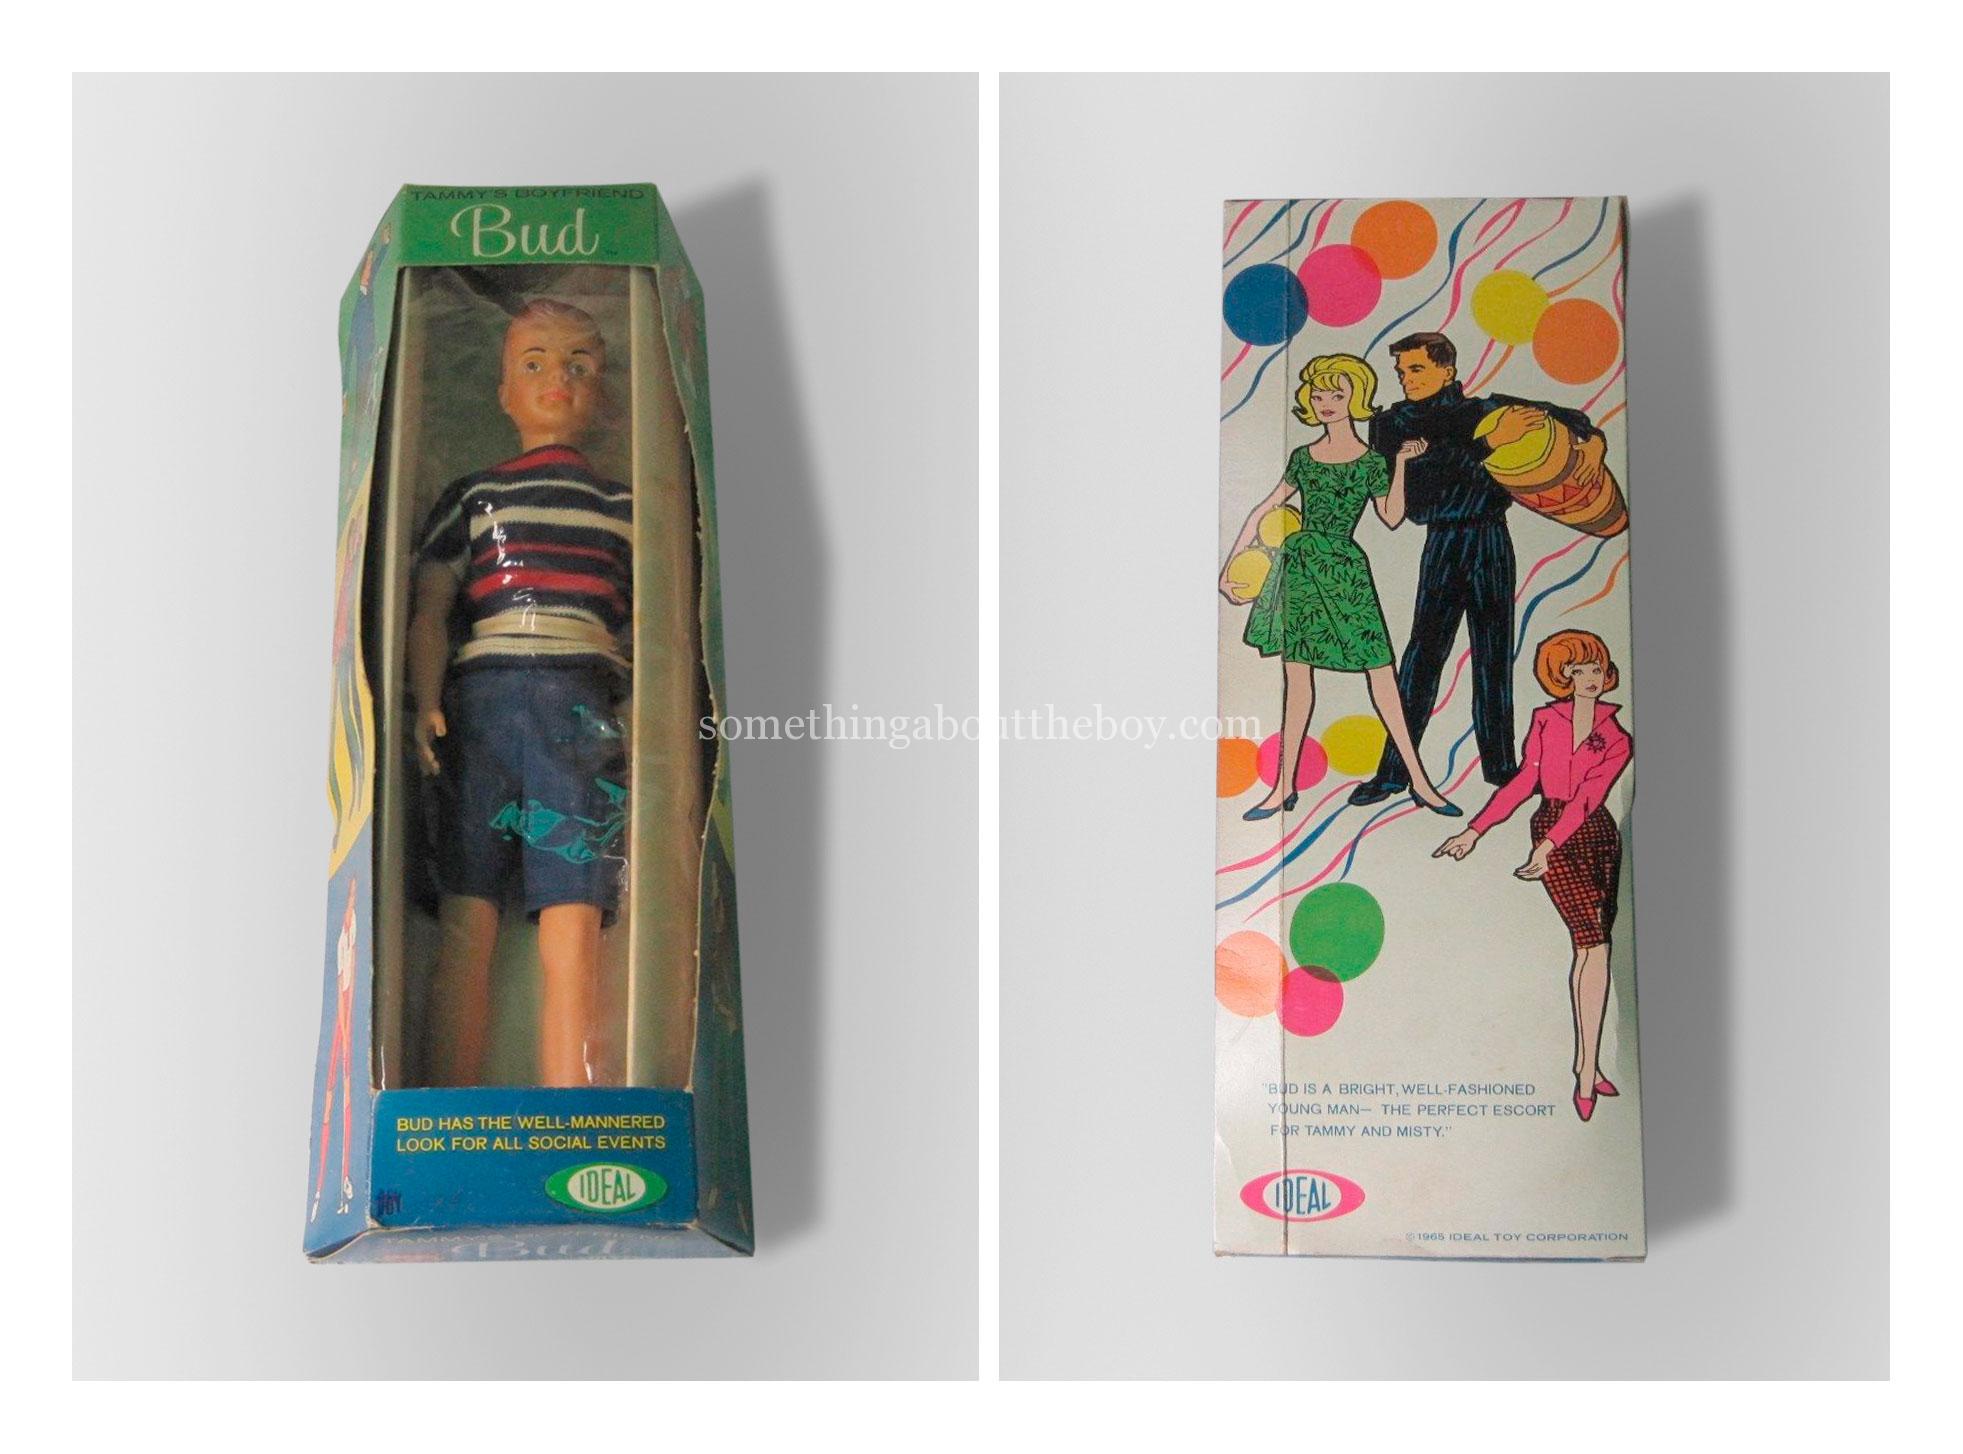 Tammy's Family Bud doll in original packaging